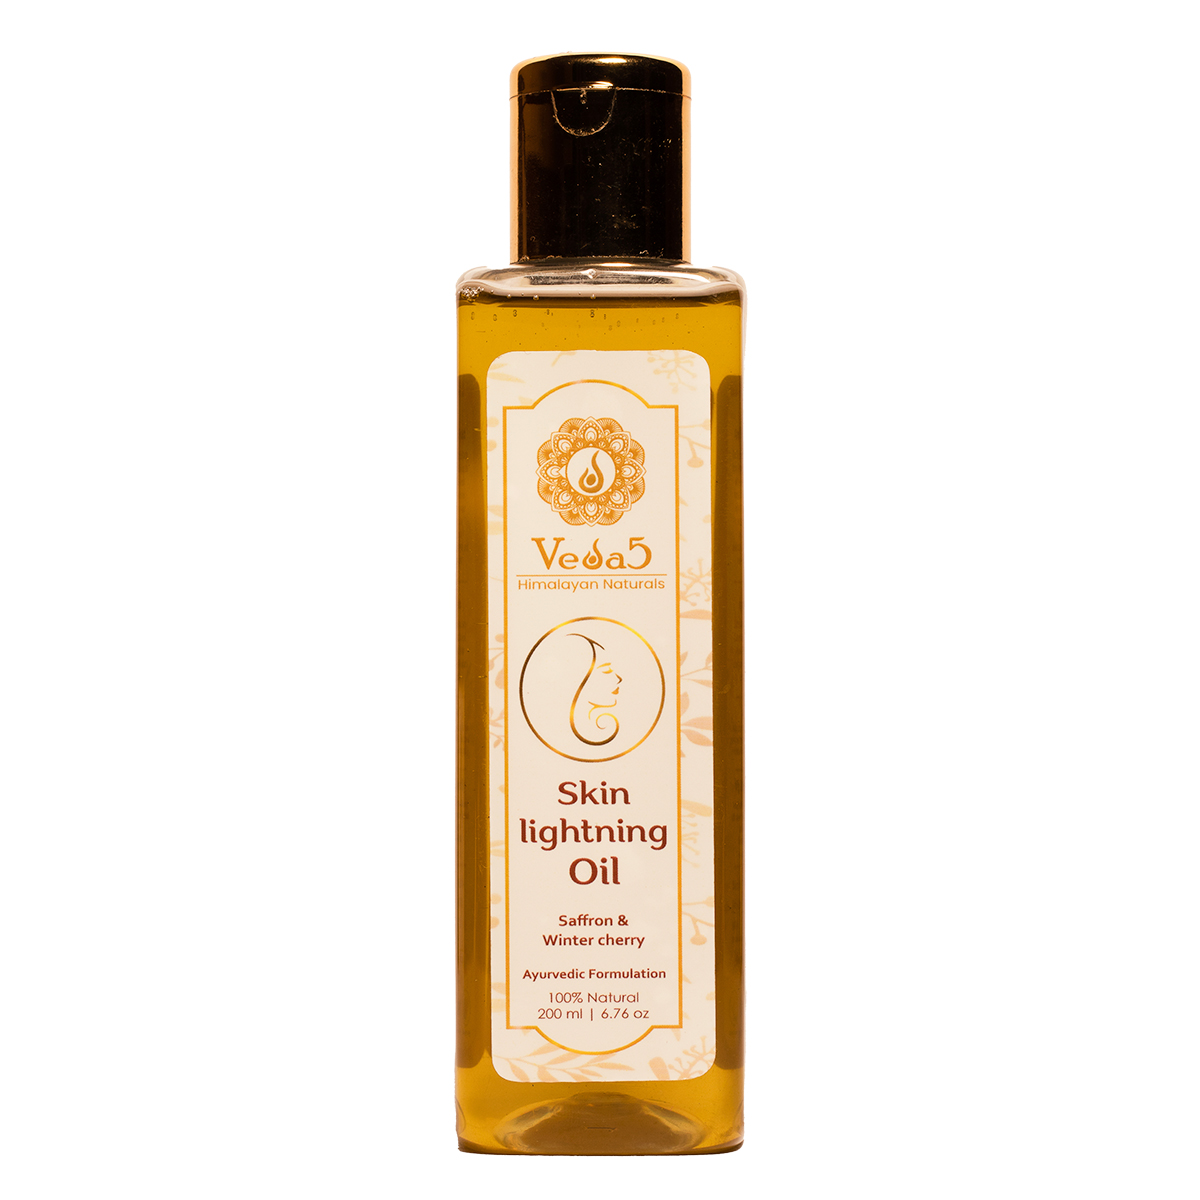 Skin Lightening Oil by Veda5 Himalayan Naturals 1